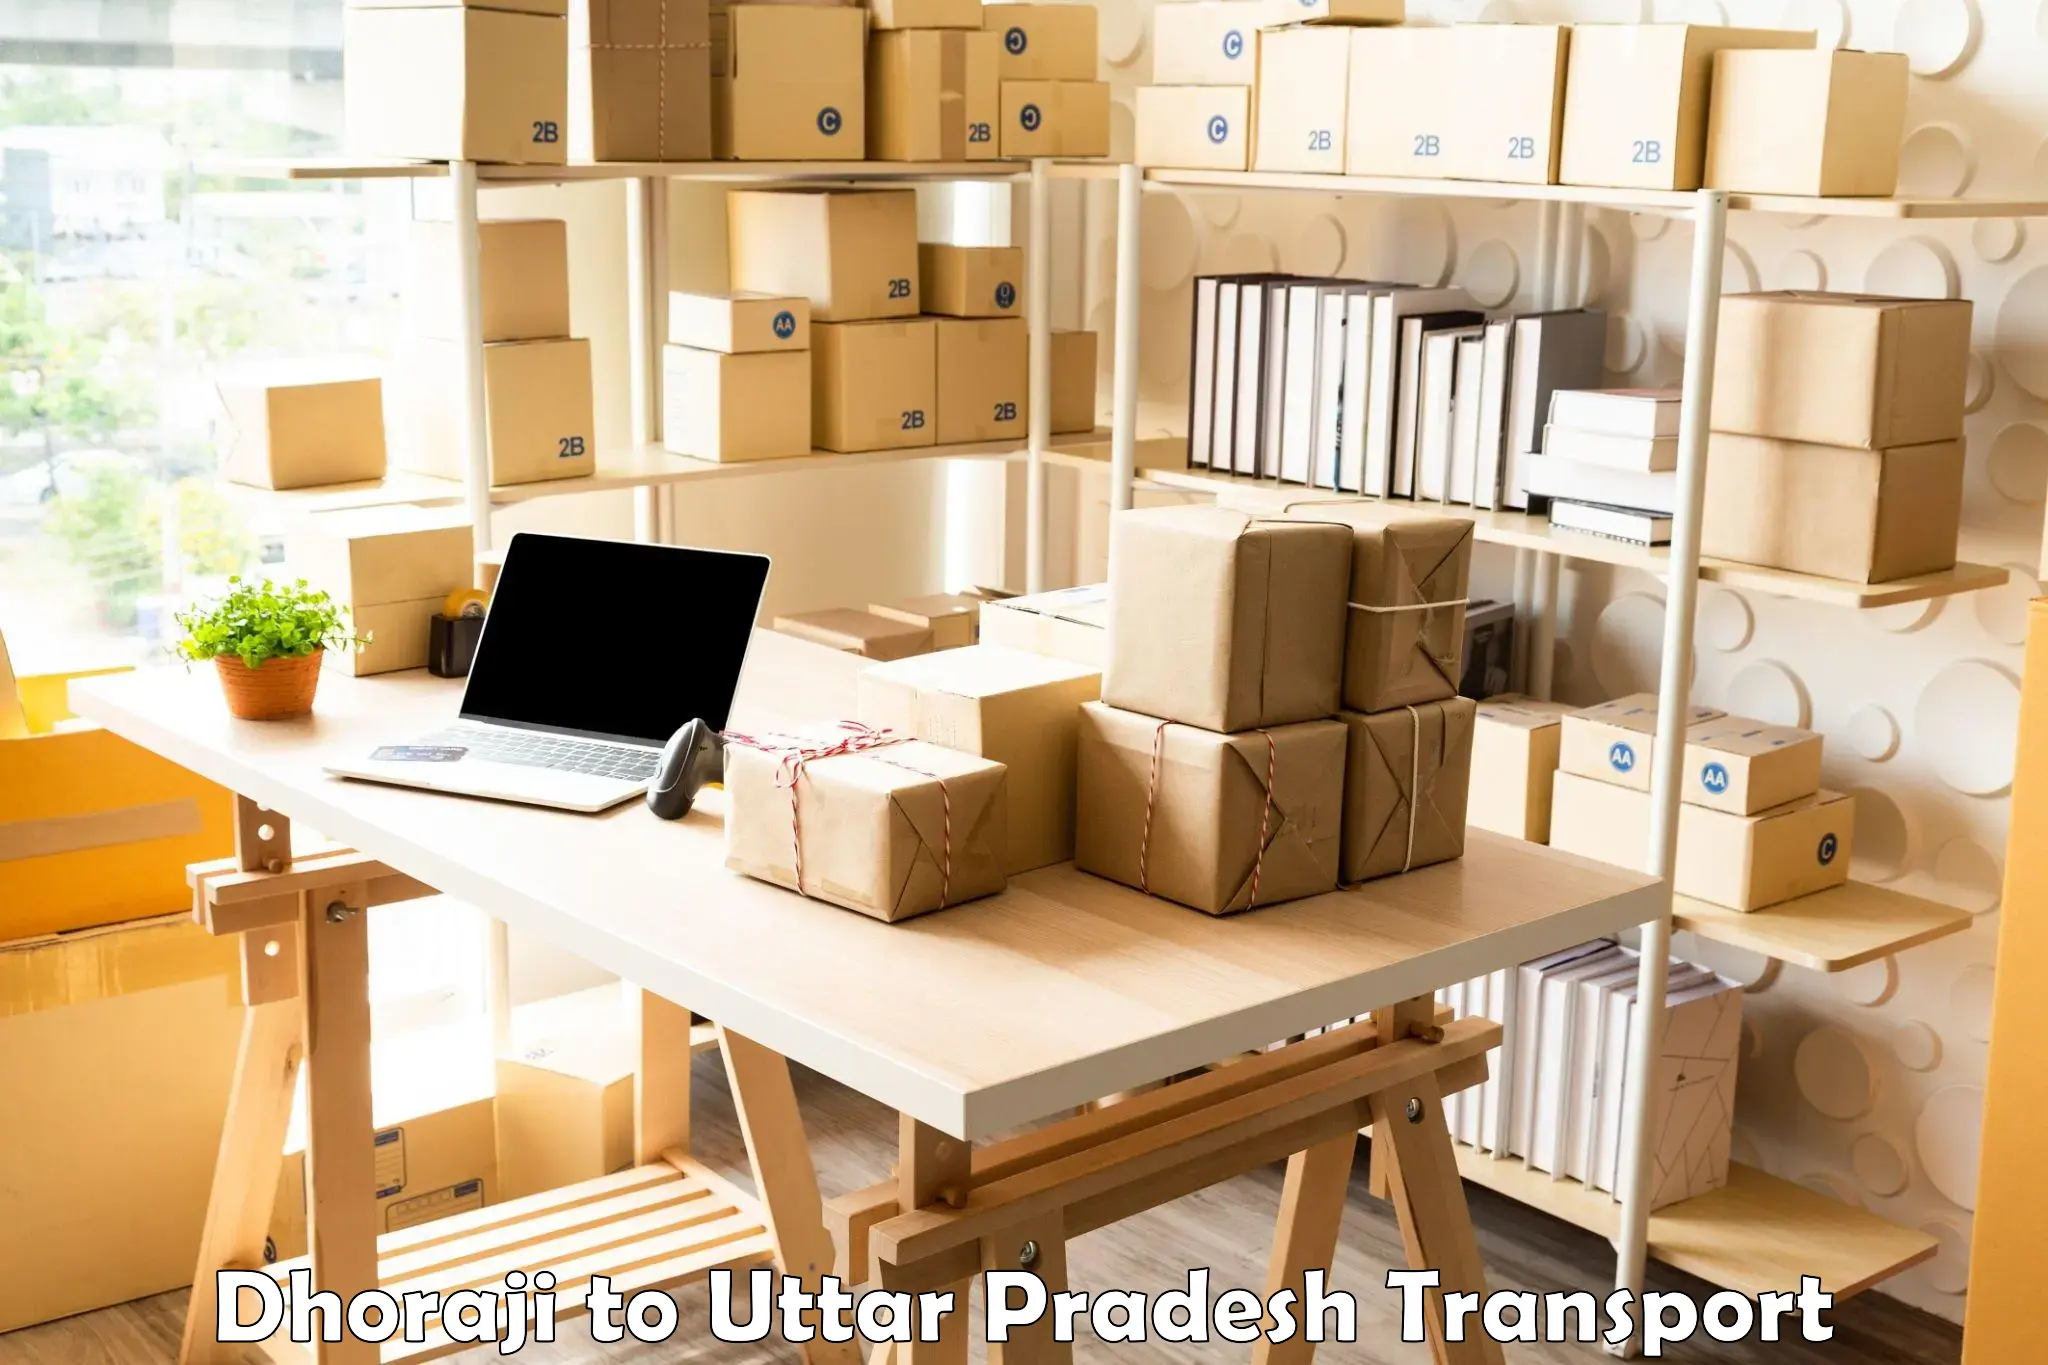 Air freight transport services Dhoraji to Ghaziabad